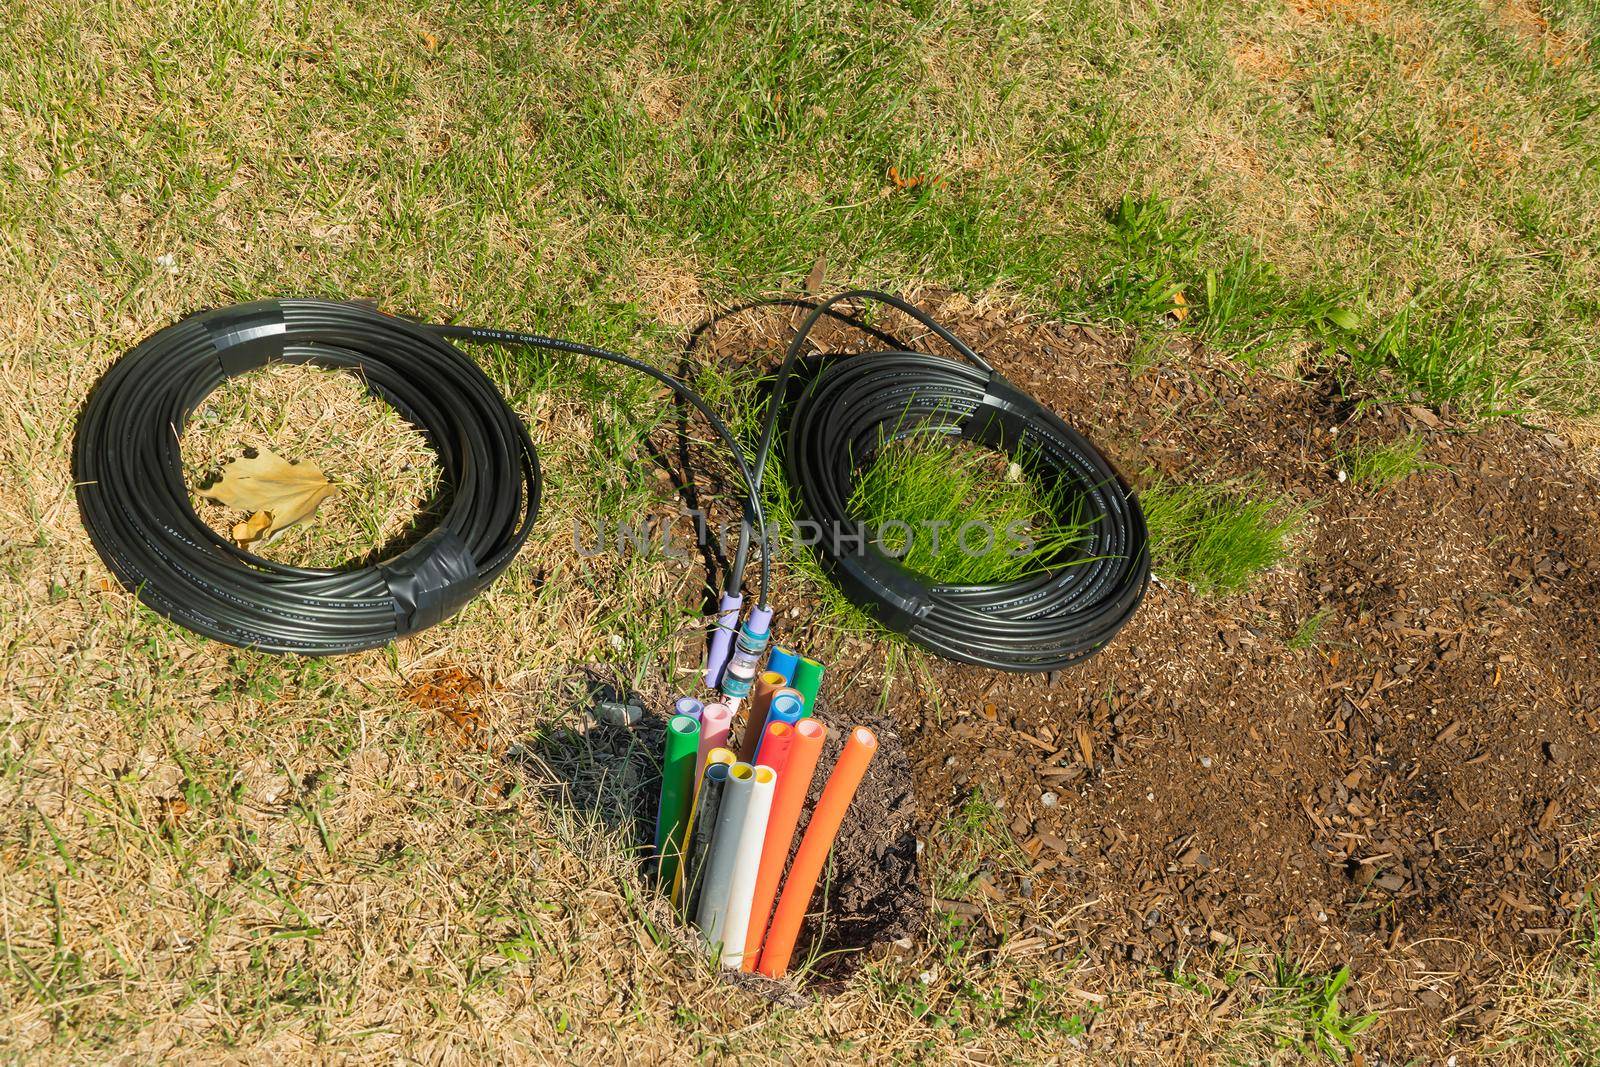 Tubes for cables with optical fiber for the Internet are laid underground